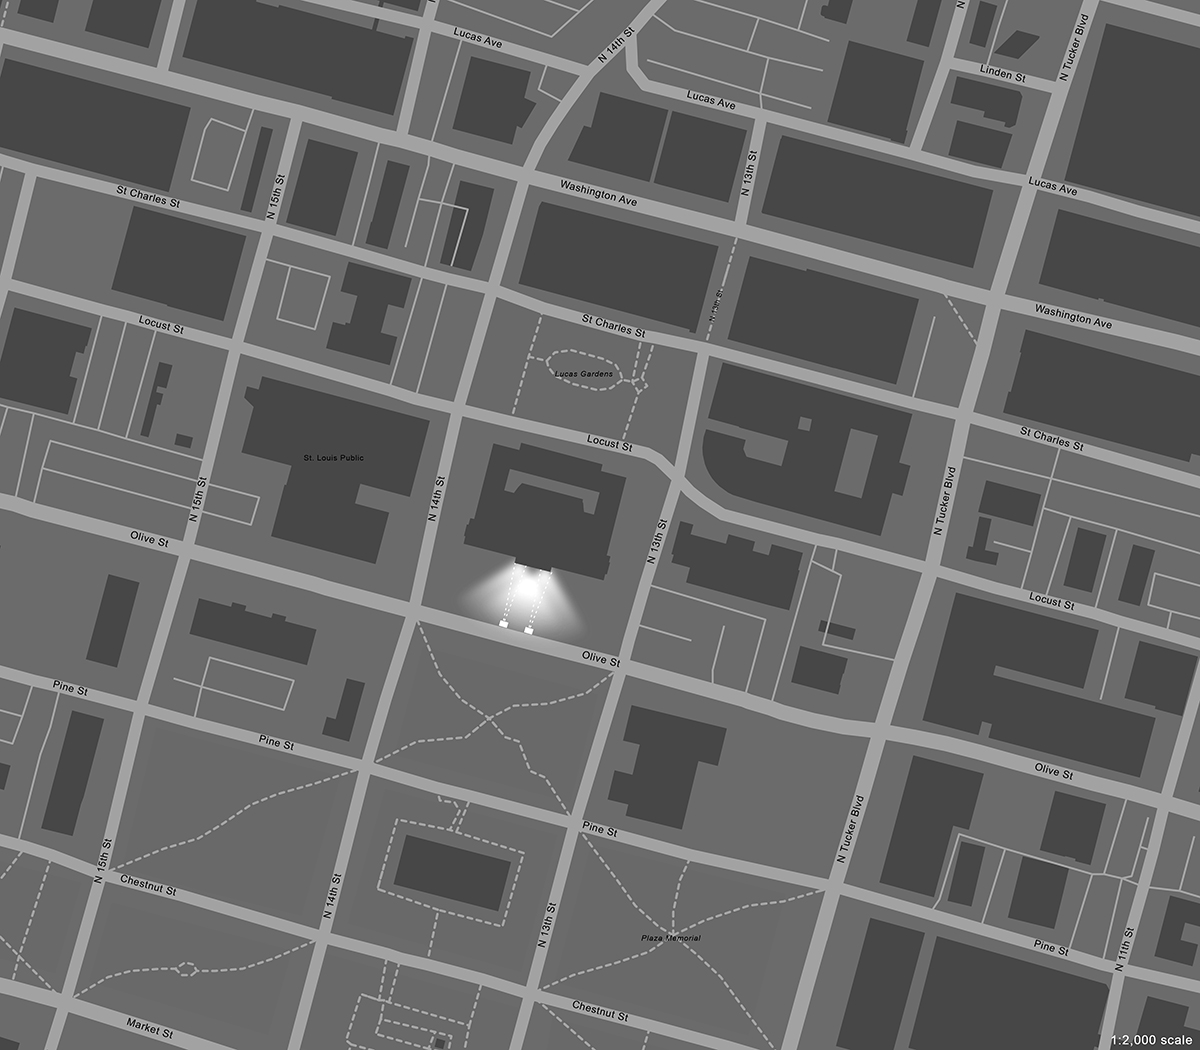 Aerial map of St. Louis Missouri, showing the location of the Central Library. A highlight on the Olive Street facade of the building shows the location of the video projection.